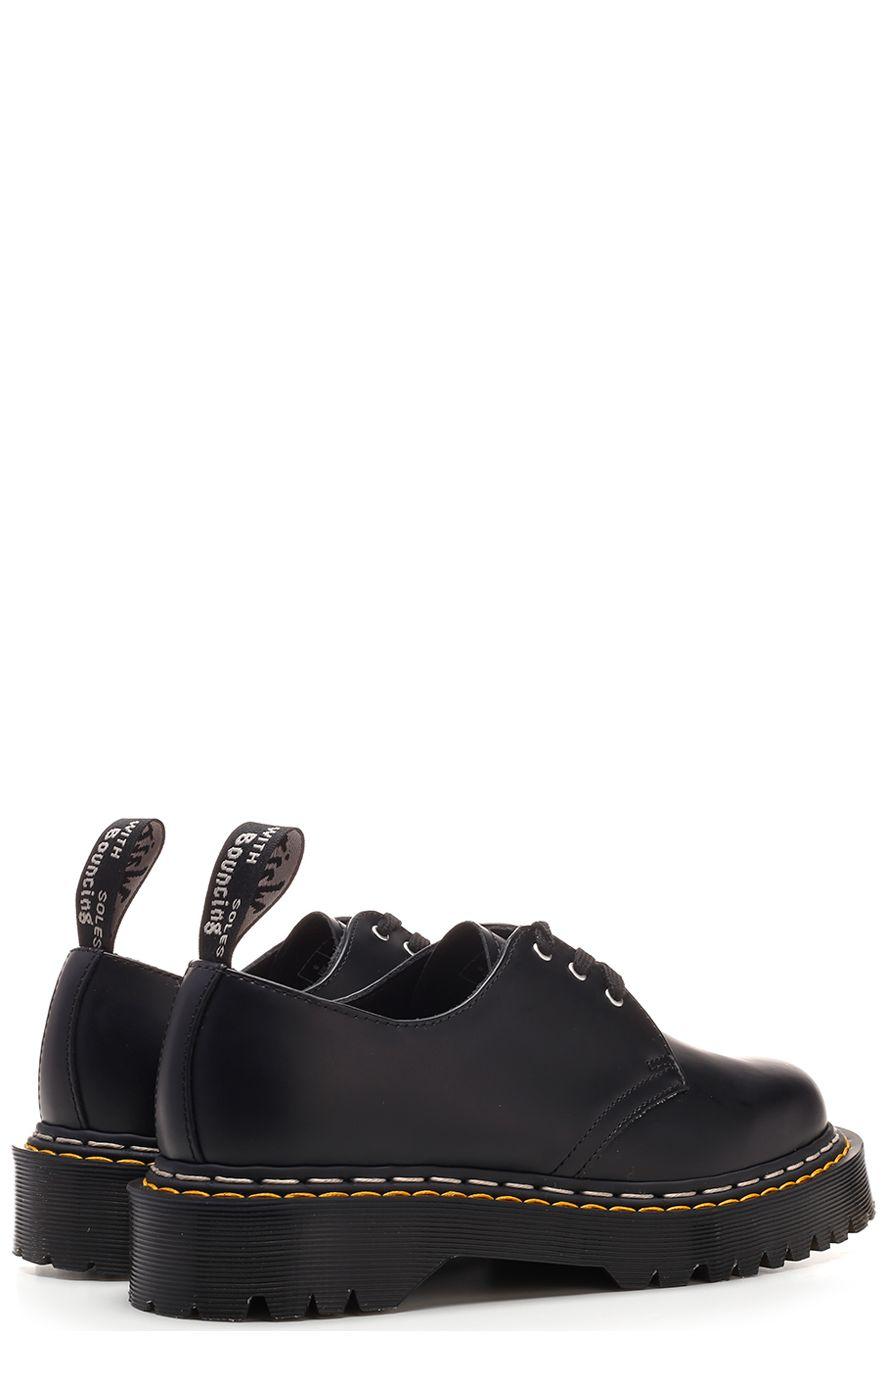 Rick Owens Leather X Dr. Martens Bex 1461 Lace Up Shoes in Black 